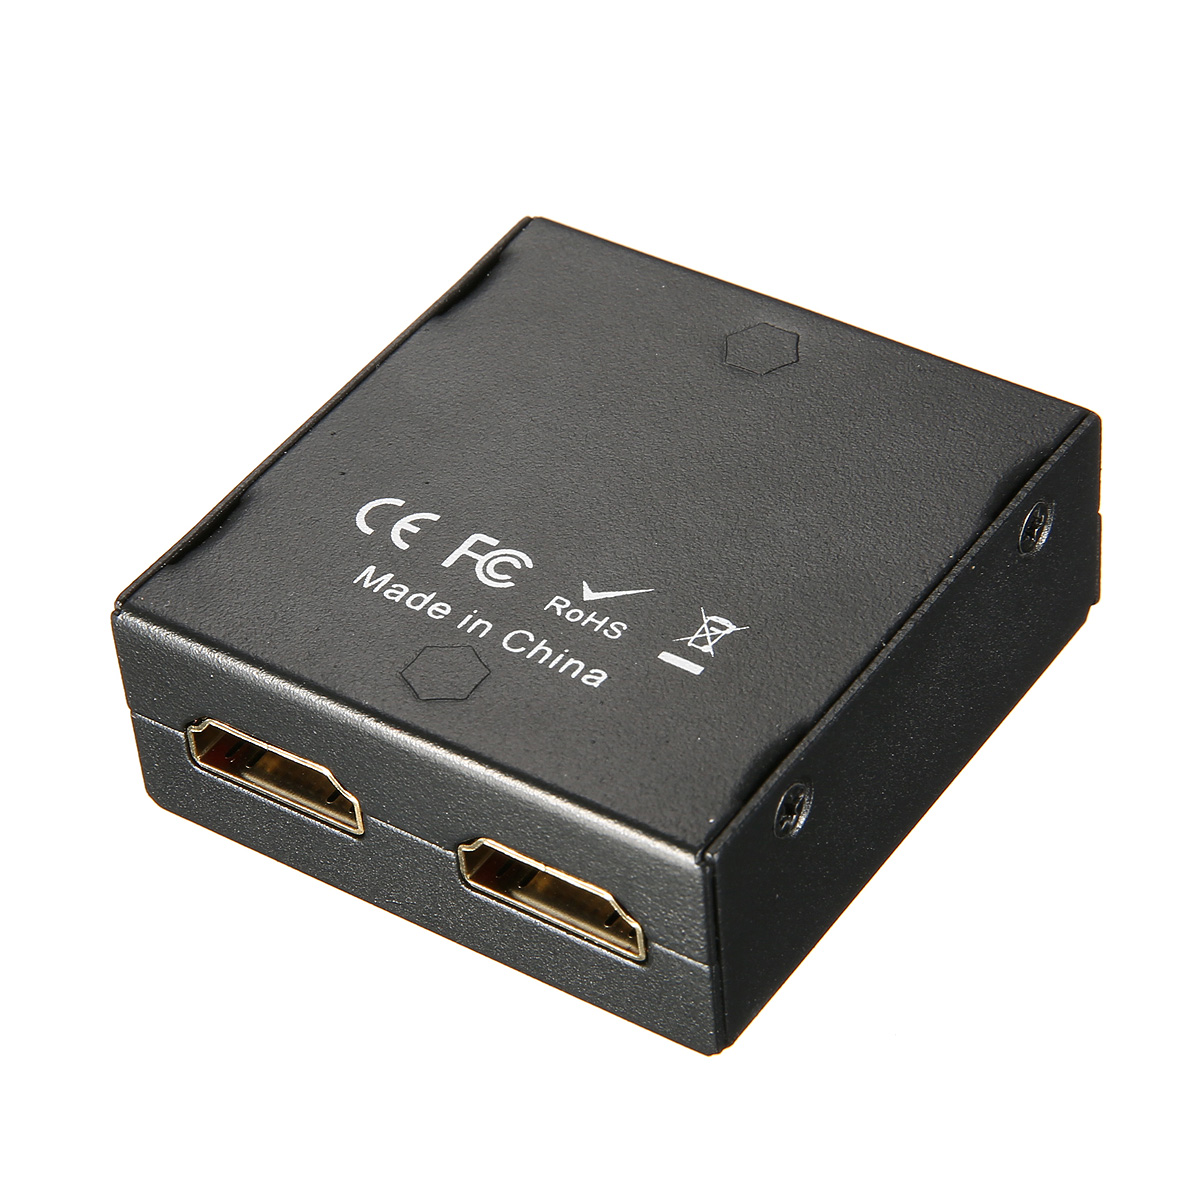 Find HDMI 2 0 HDTV Switch Switcher Splitter Bi Direction Hub HDCP 2x1 1x2 In Out 4K for Sale on Gipsybee.com with cryptocurrencies